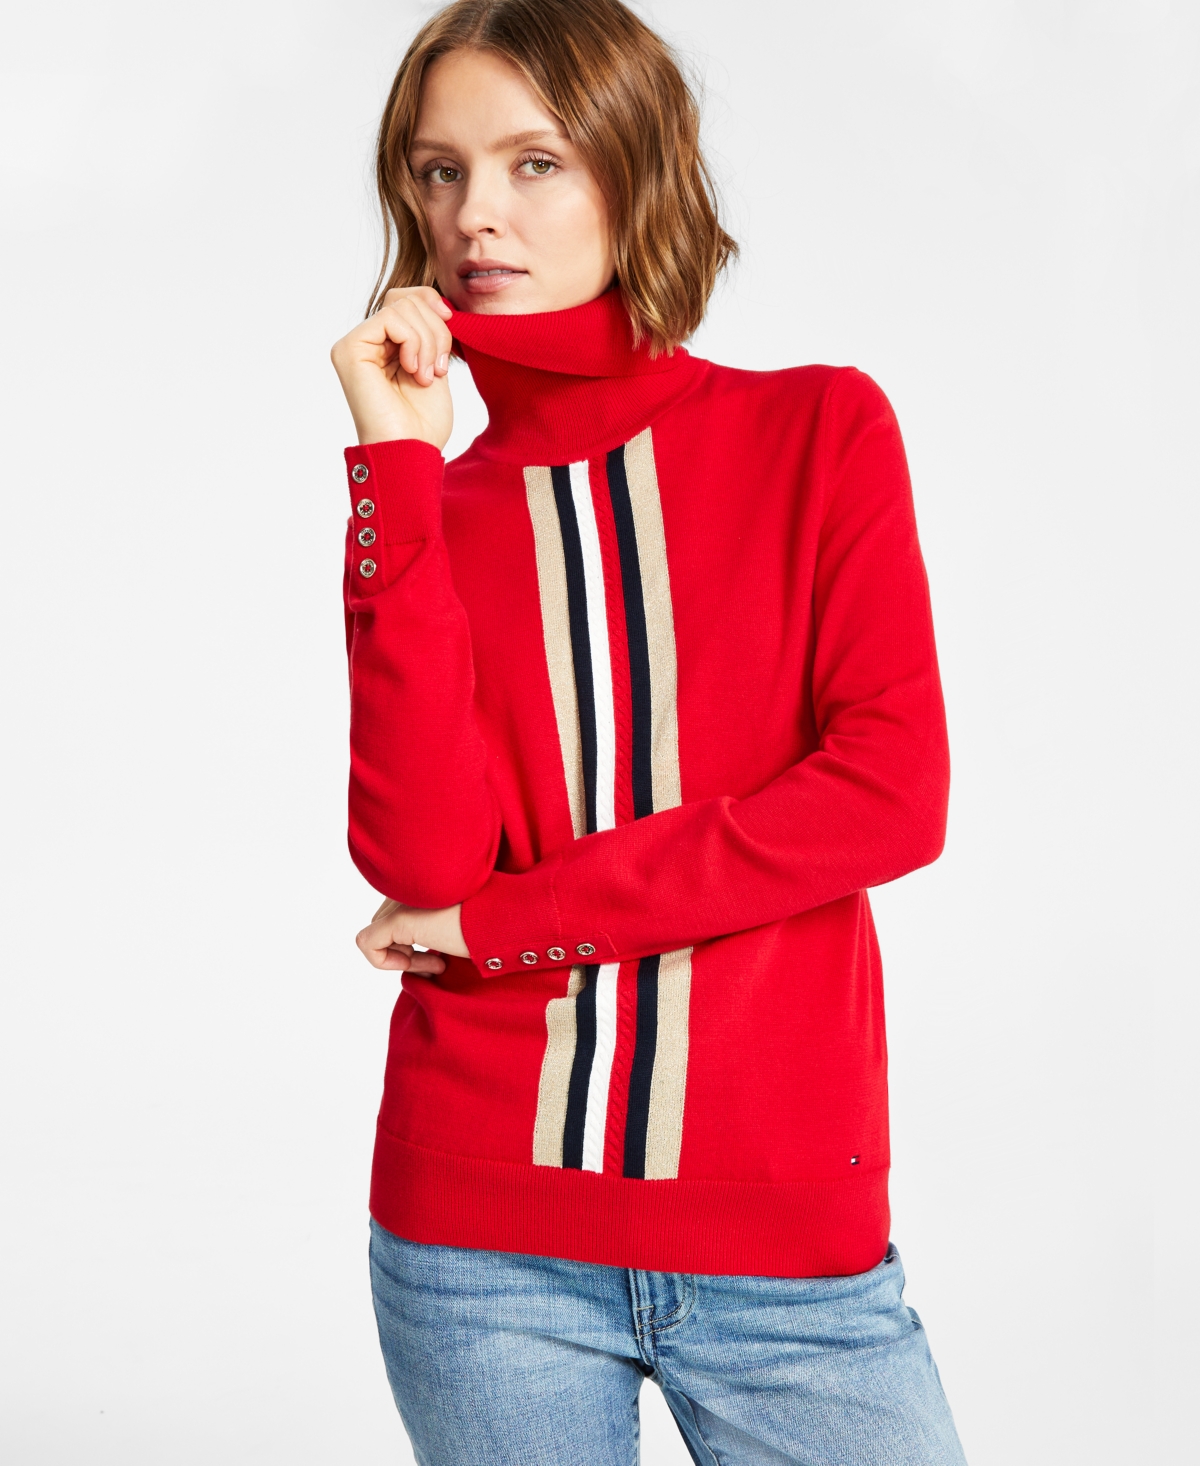 Tommy Hilfiger Women's Global Cable Stella Sweater